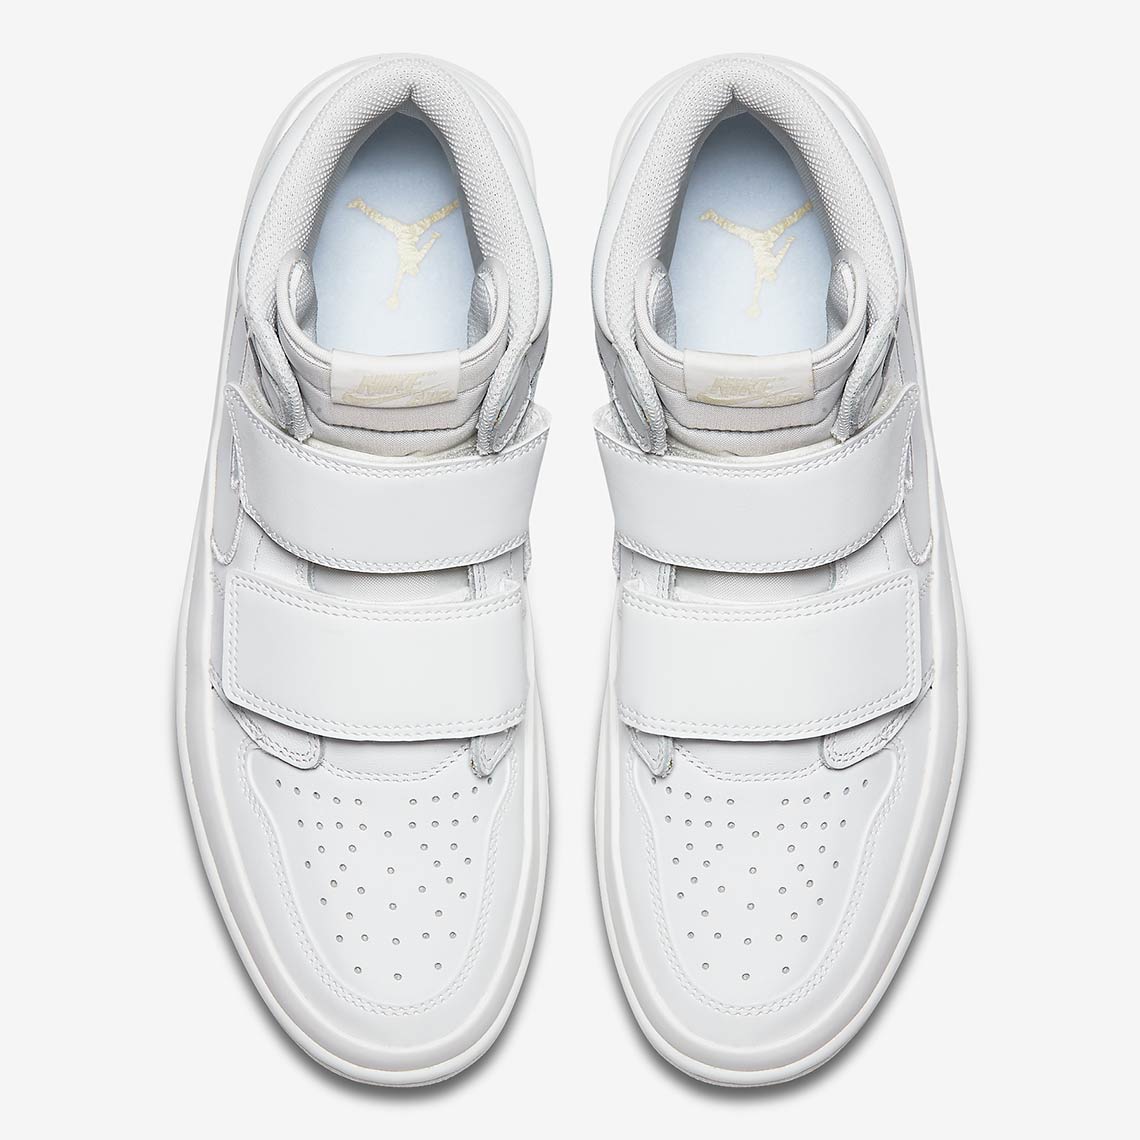 all white jordans with strap